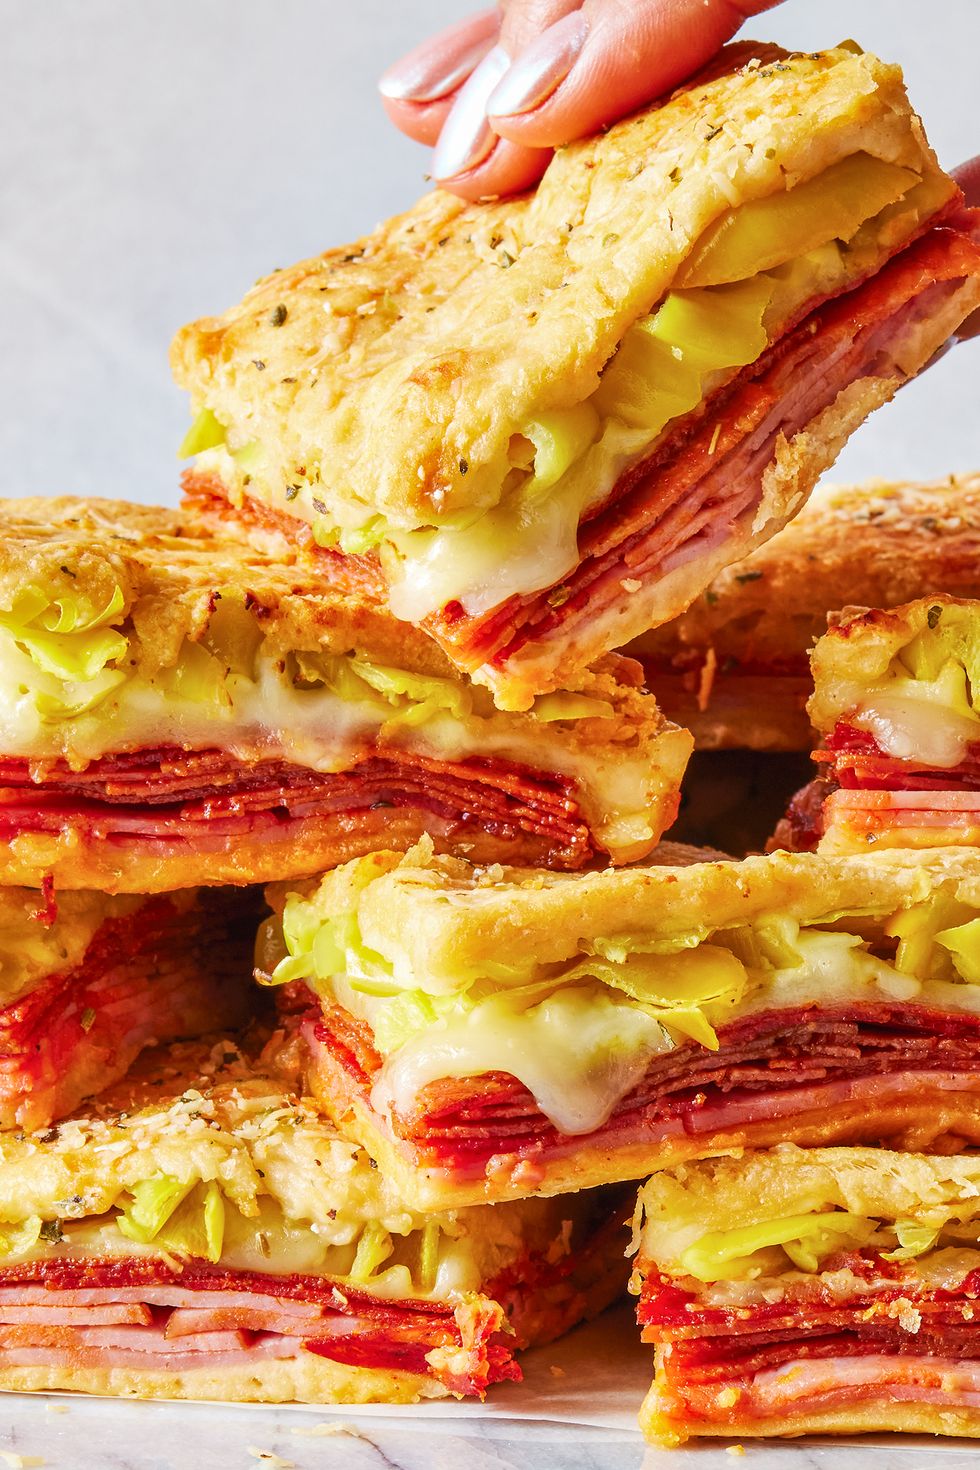 stacked sandwiches with layers of ham, pepperoni, cheese, and pepperoncinis between crescent dough